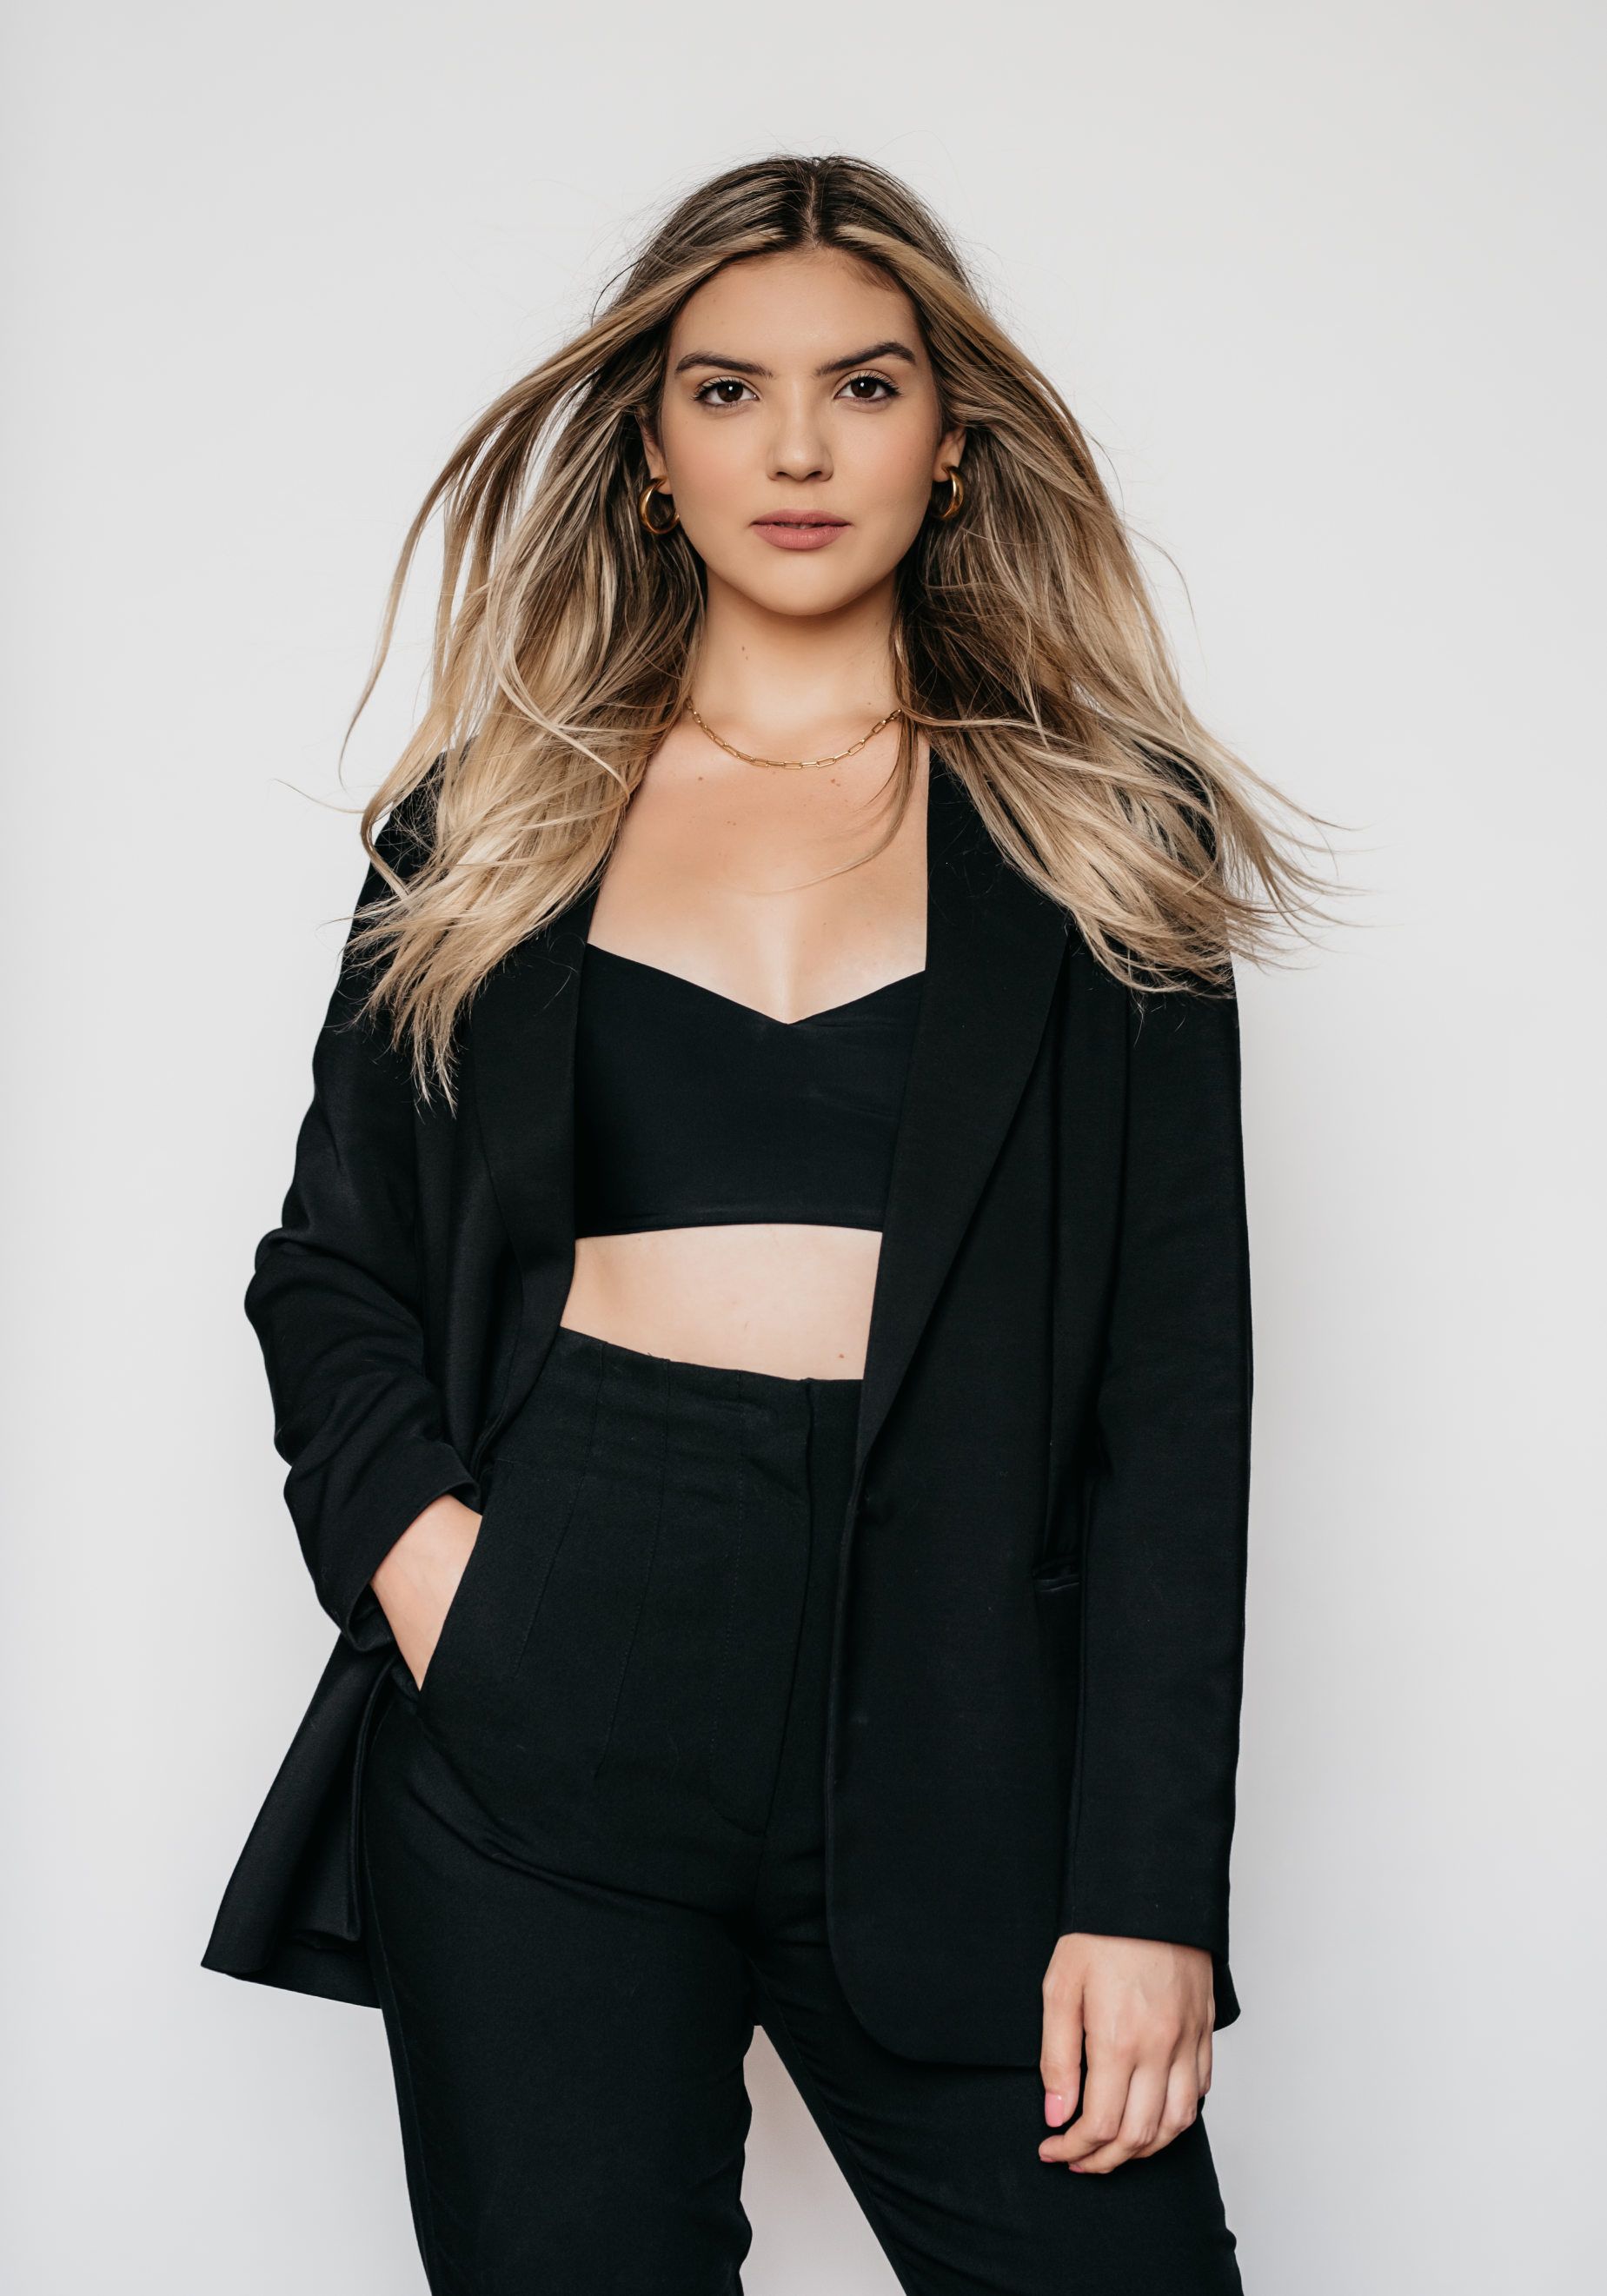 A woman wearing a black blazer and crop top for Toronto headshots.